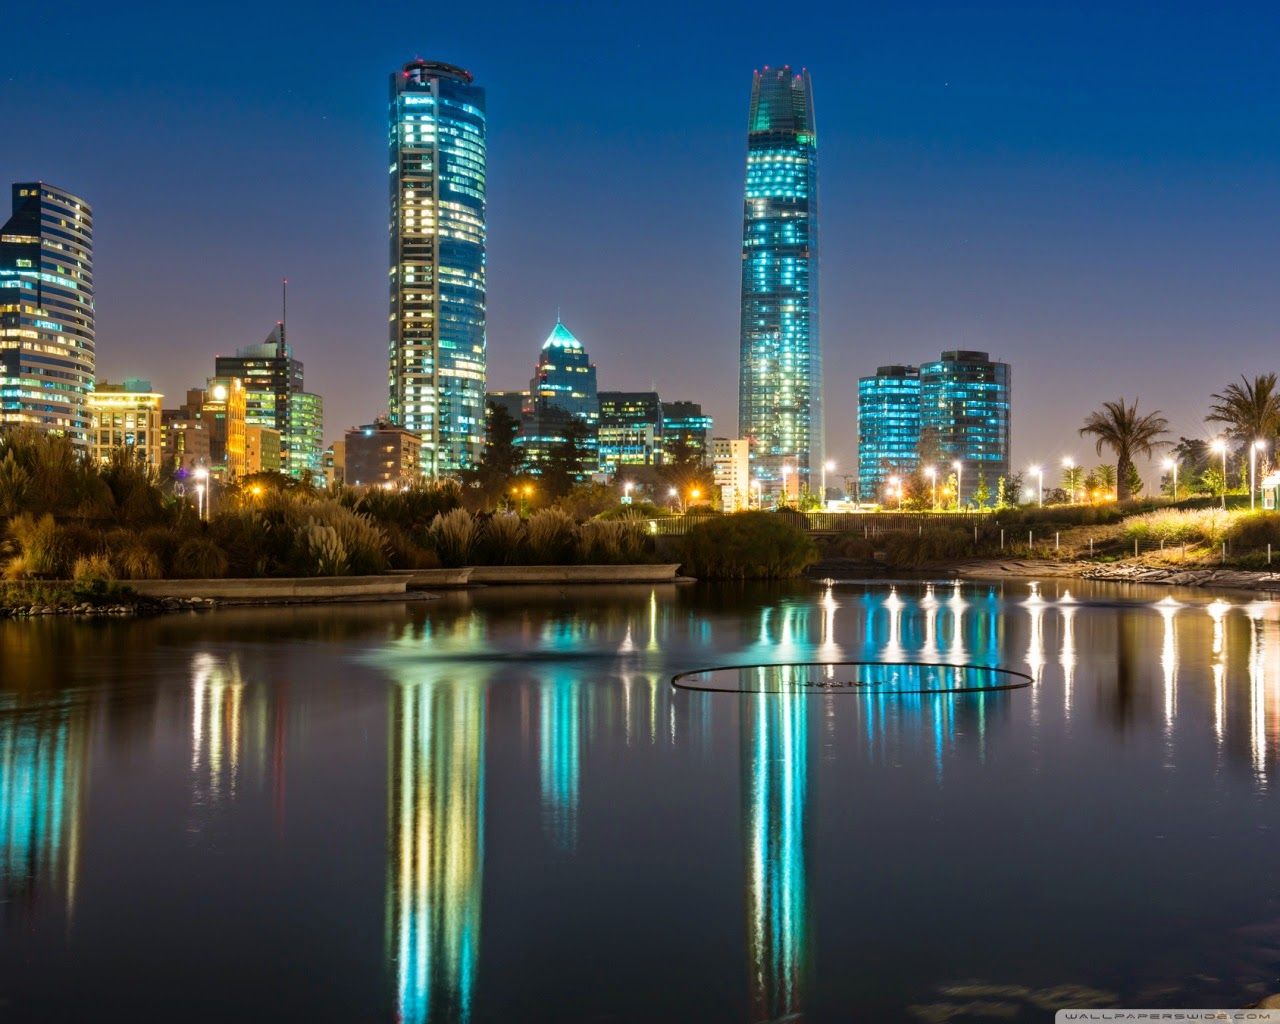 Santiago Chile Wallpapers